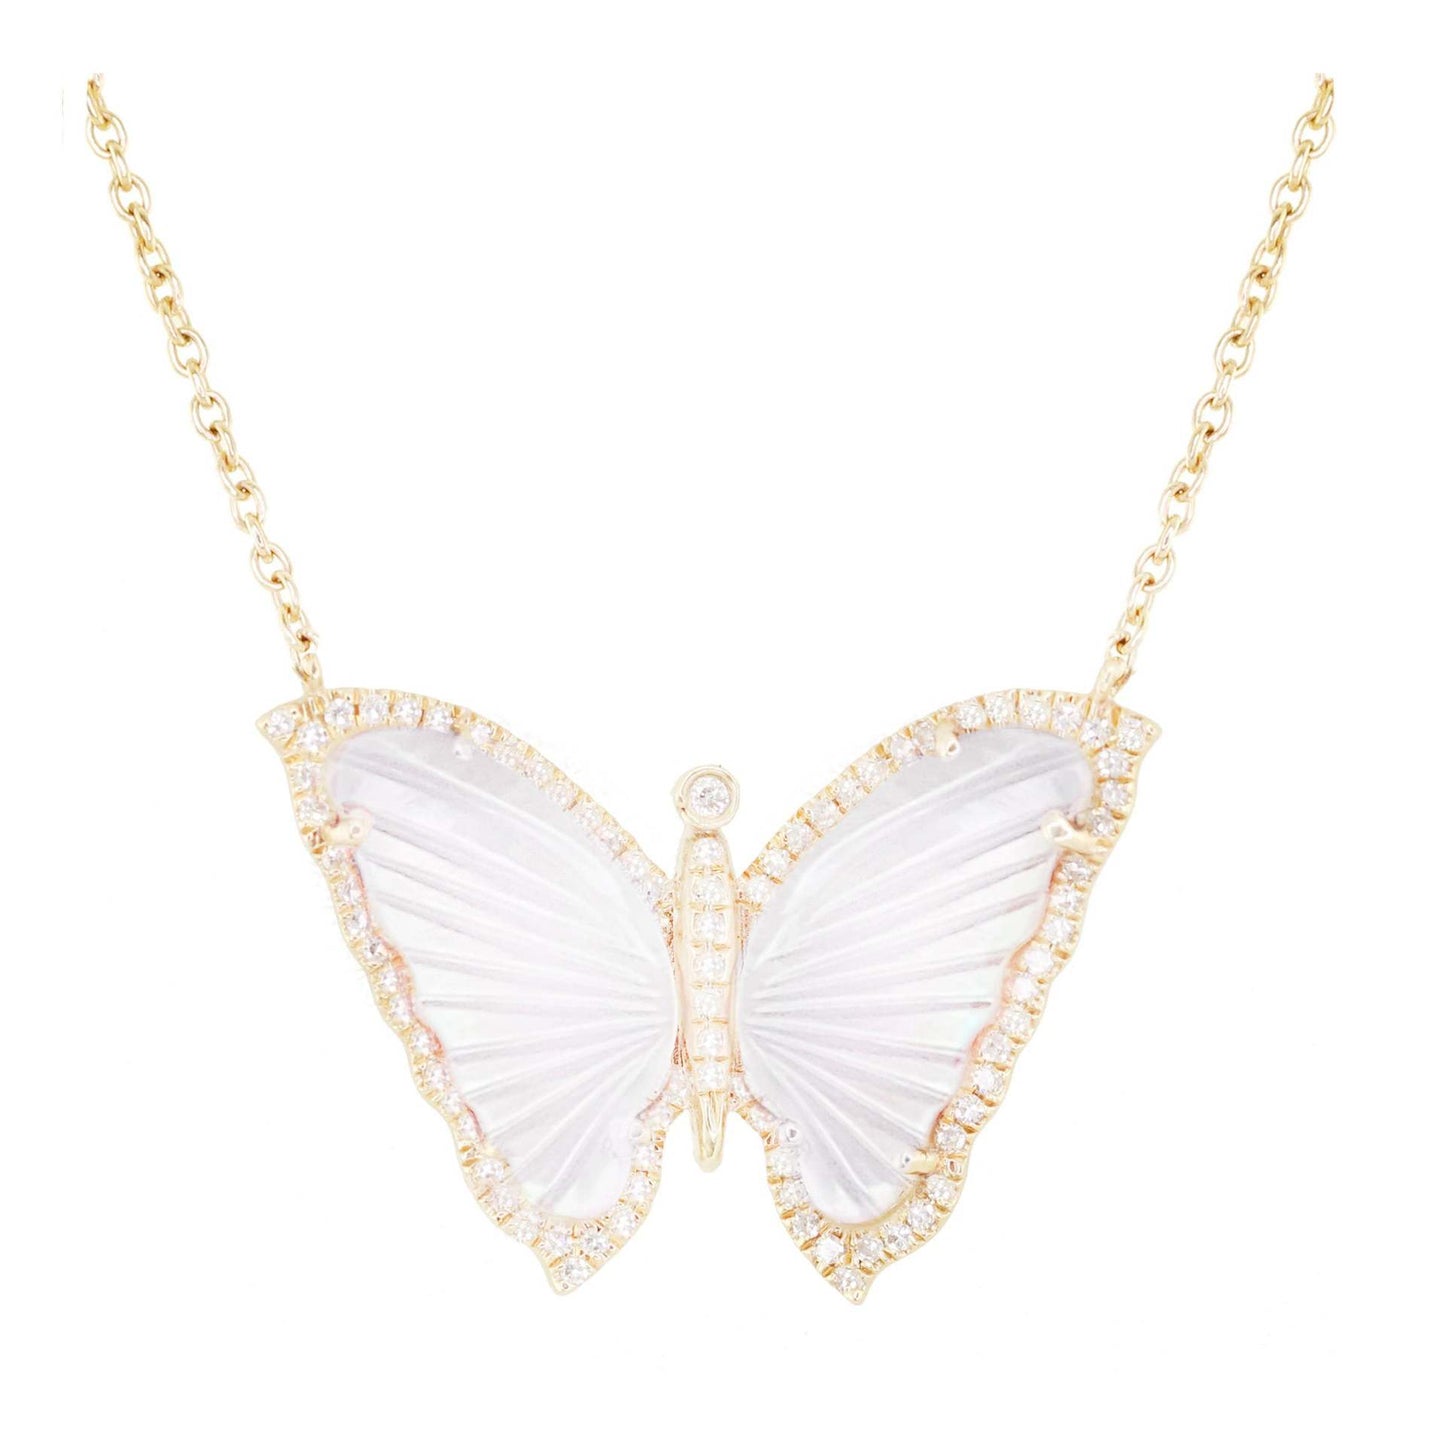 Small Acrylic Butterfly Necklace